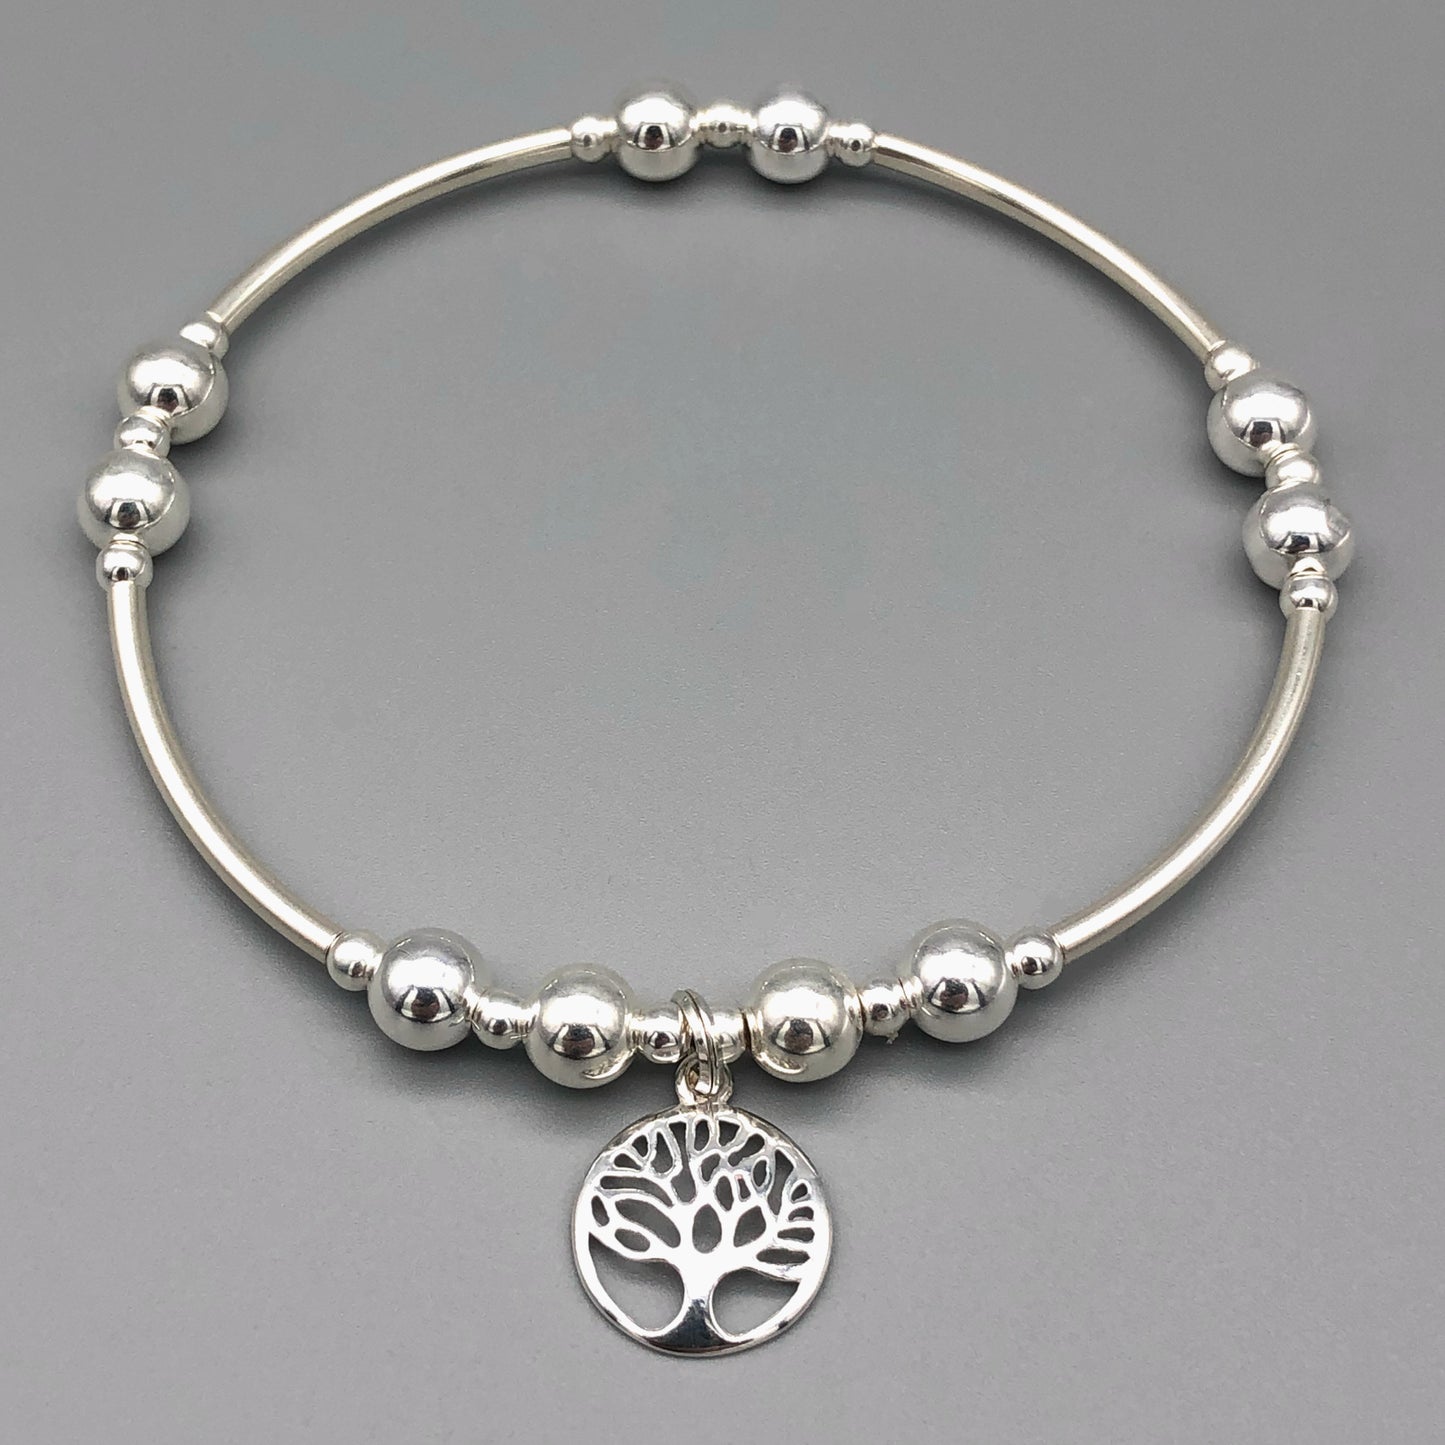 Tree of Life charm sterling silver women's hand-made stacking bracelet by My Silver Wish